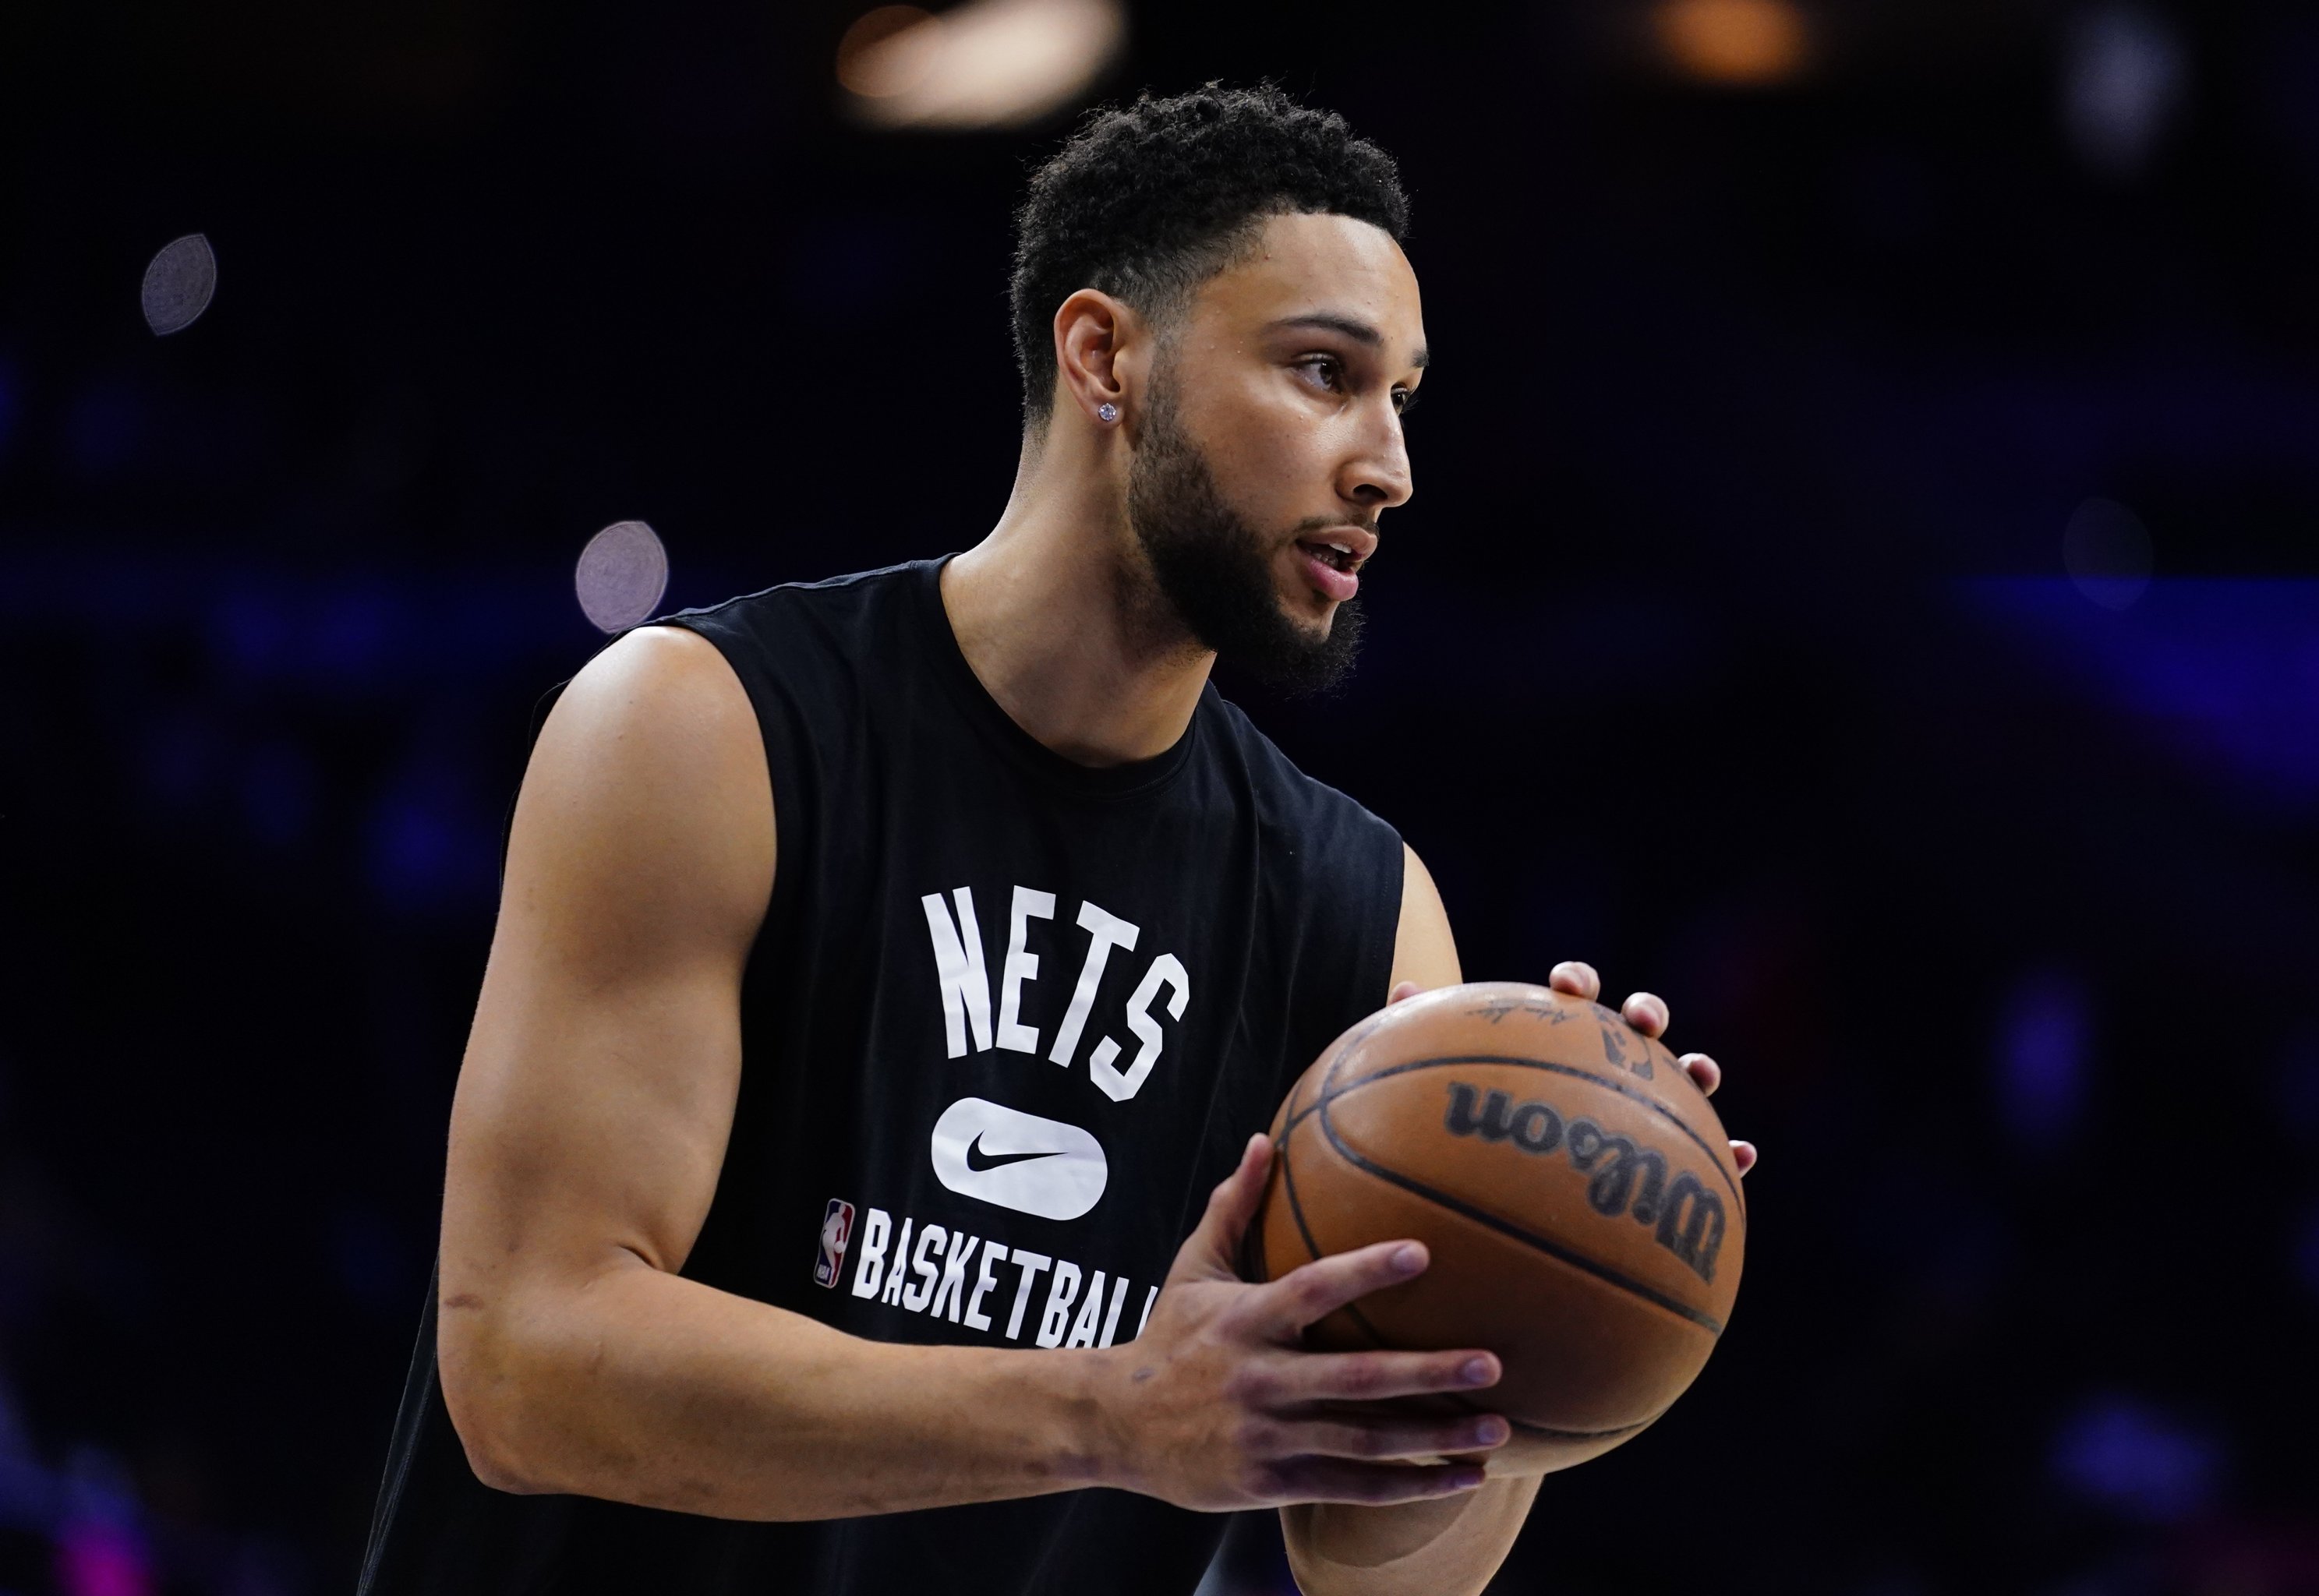 Stephen Curry Wanted to Play in New York, but Fate Intervened